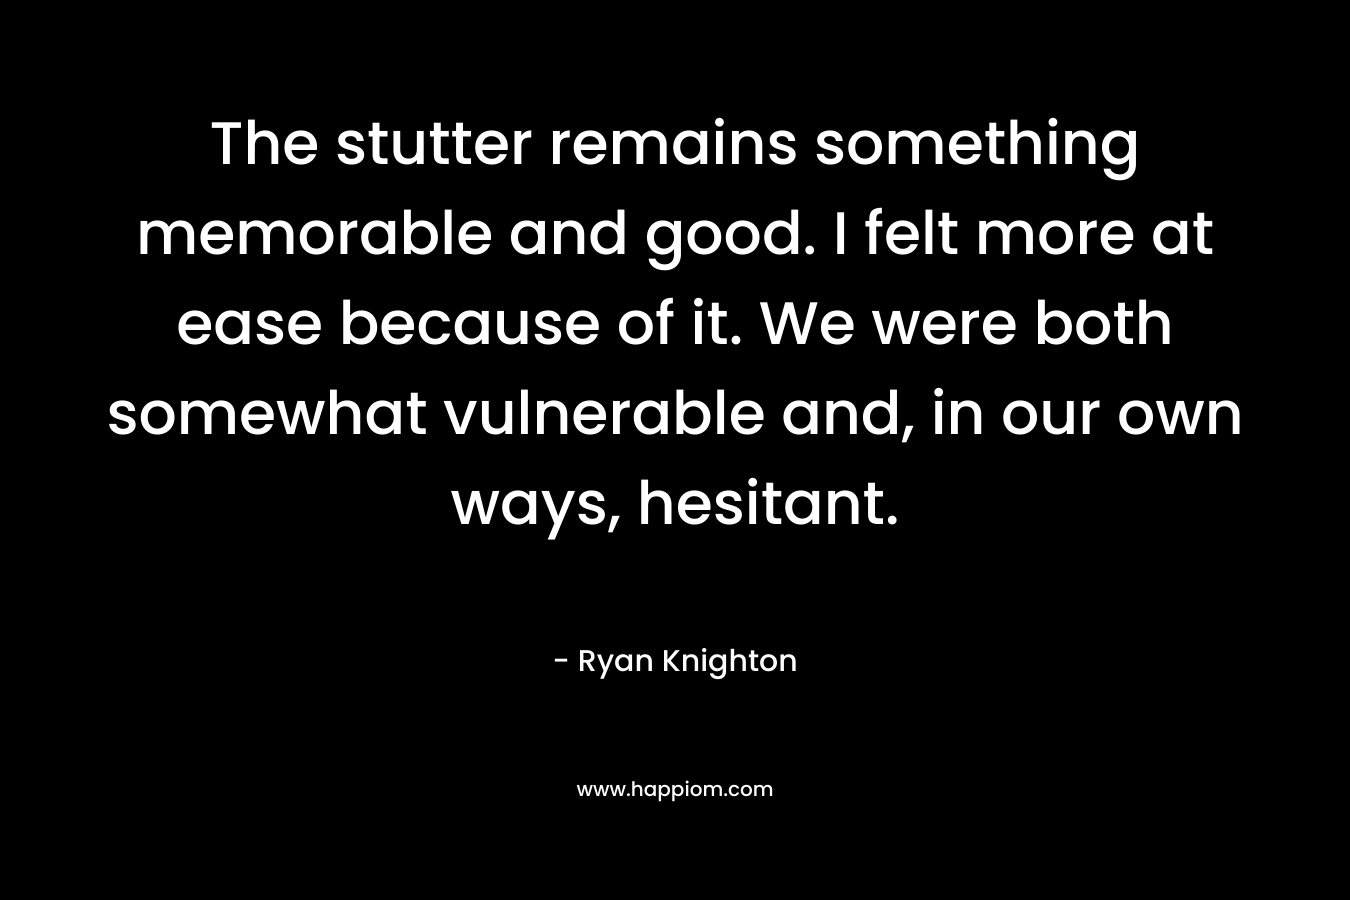 The stutter remains something memorable and good. I felt more at ease because of it. We were both somewhat vulnerable and, in our own ways, hesitant. – Ryan Knighton